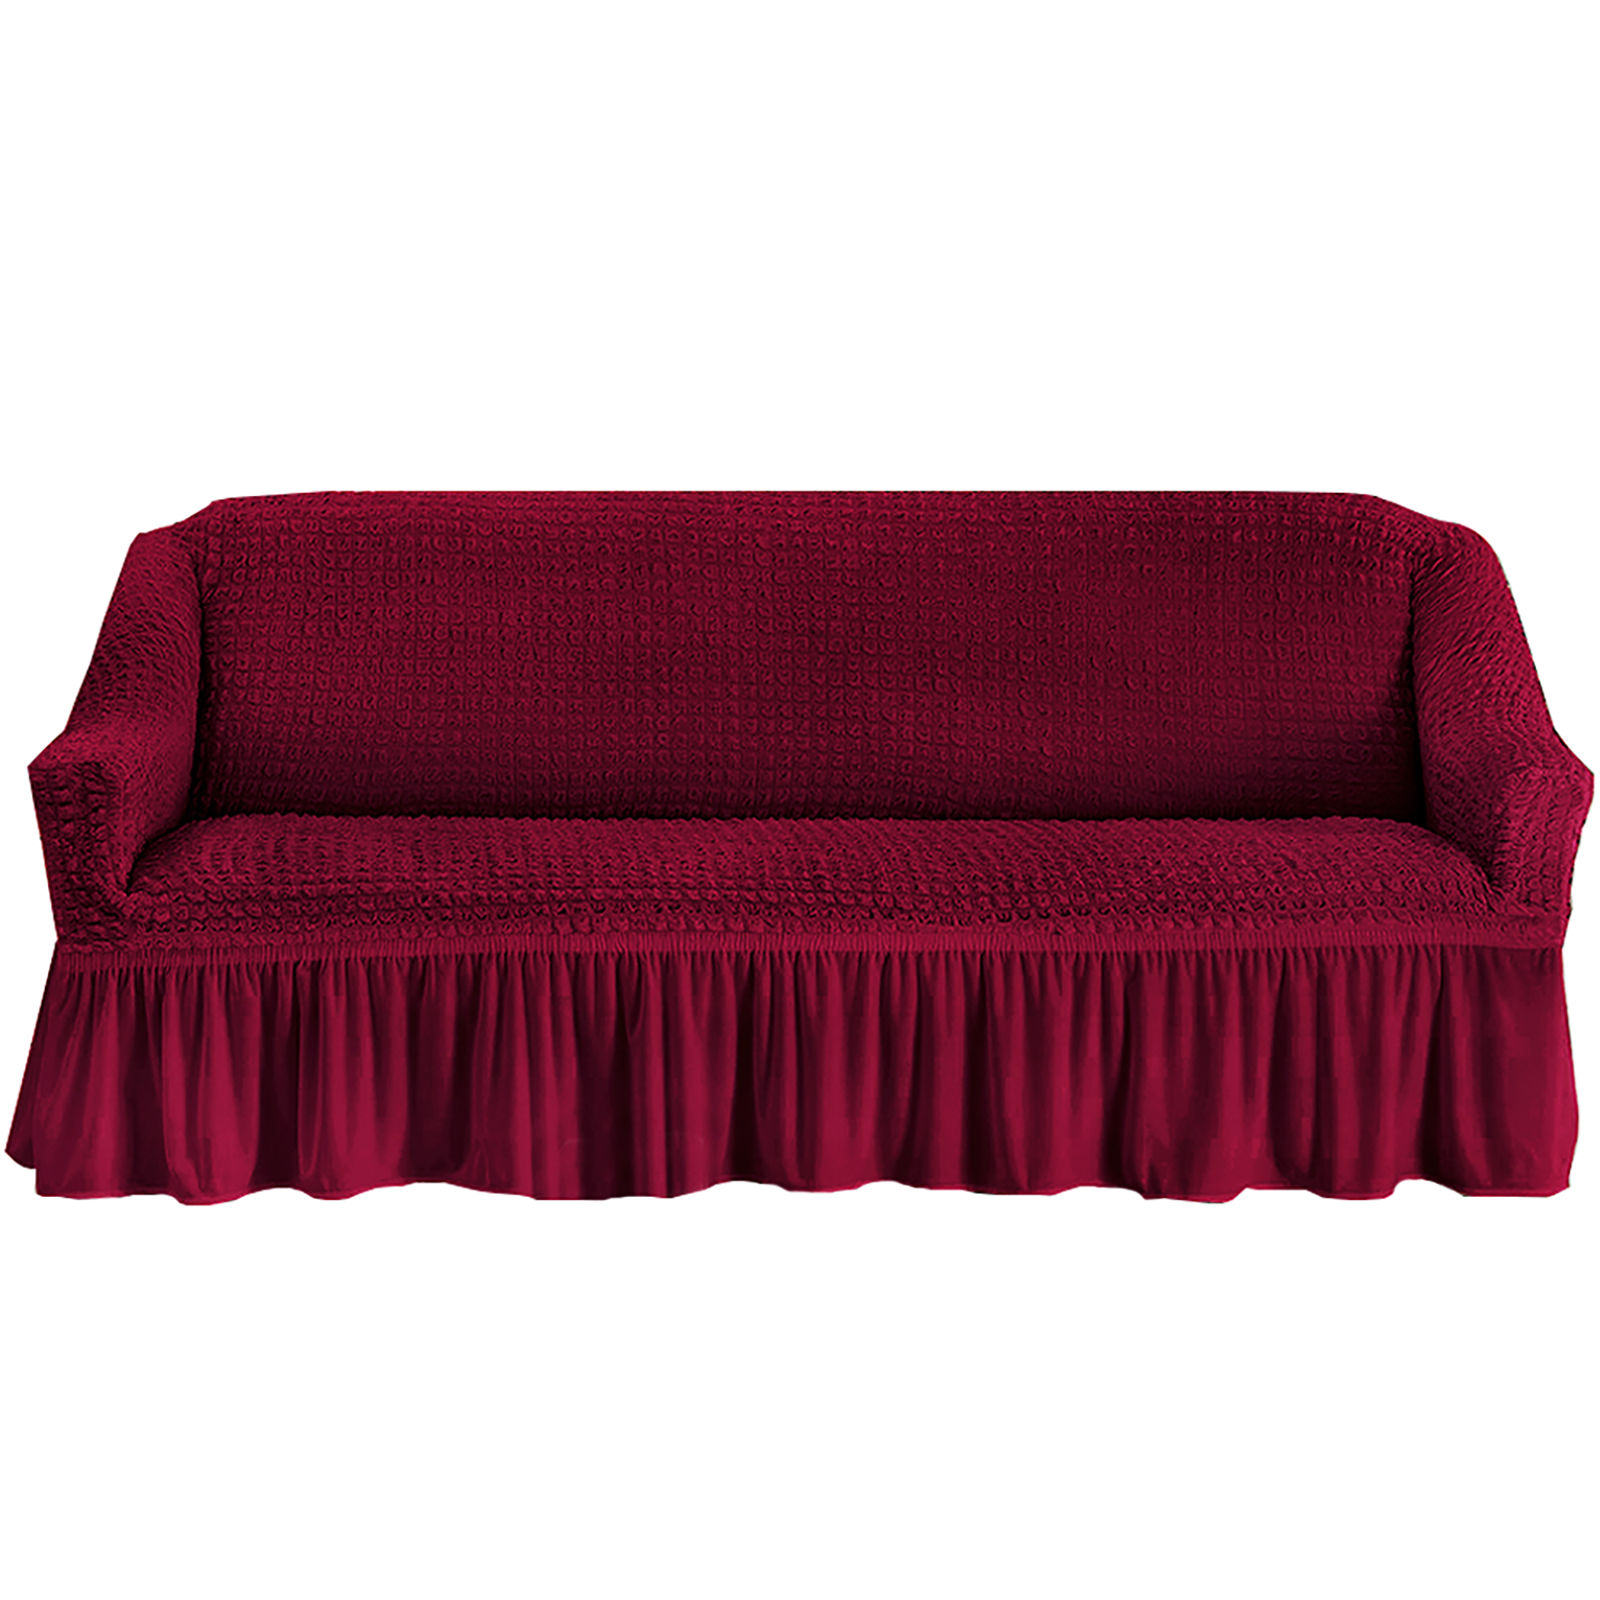 Stretch Sofa Slipcover, 3 Seater Sofa Slipcovers With Skirt With Armless Soft Sofa Cover Elastic Straps Sofa Slipcover For Living Room Kids Pets-red-Large